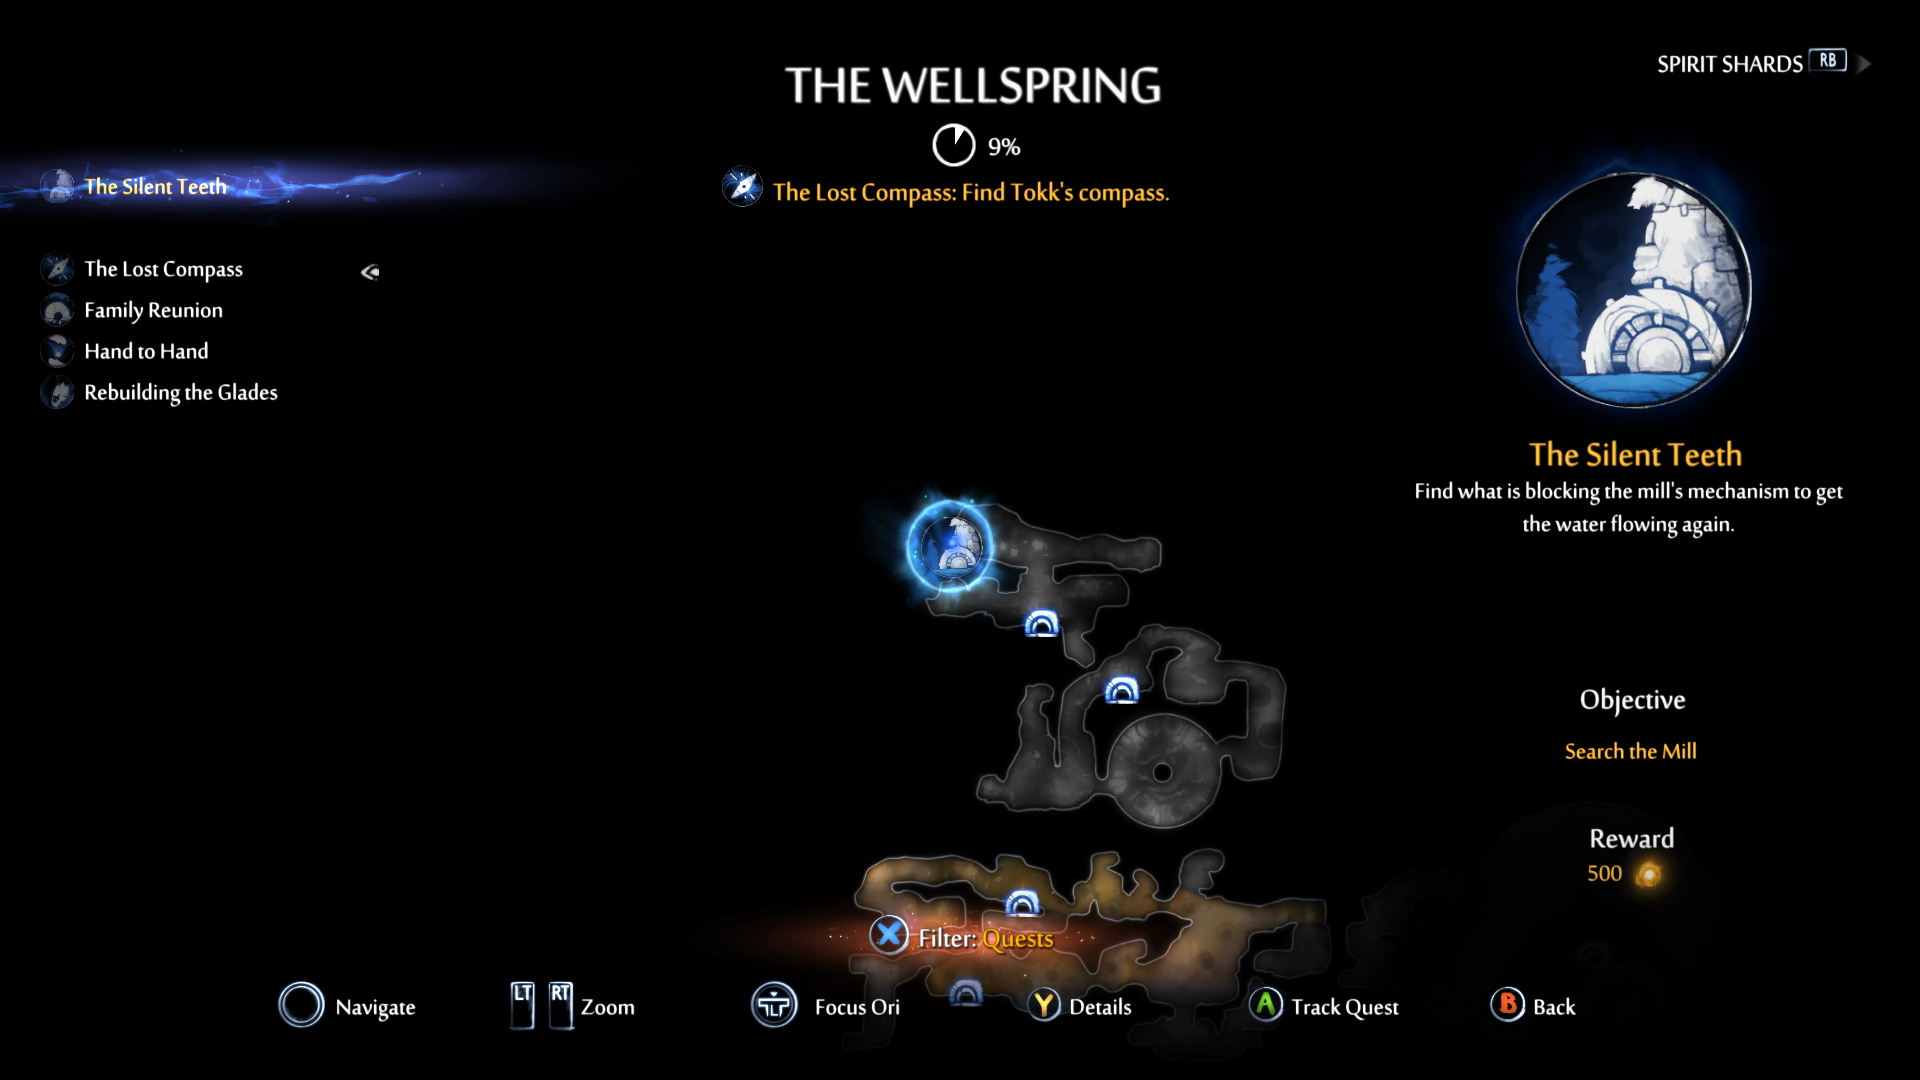 The map in Ori and the Will of the Wisps. The title of the area is at the top of the screen. It's called The Wellspring. Under the title, an indicator shows that the overall progress is 9%. 